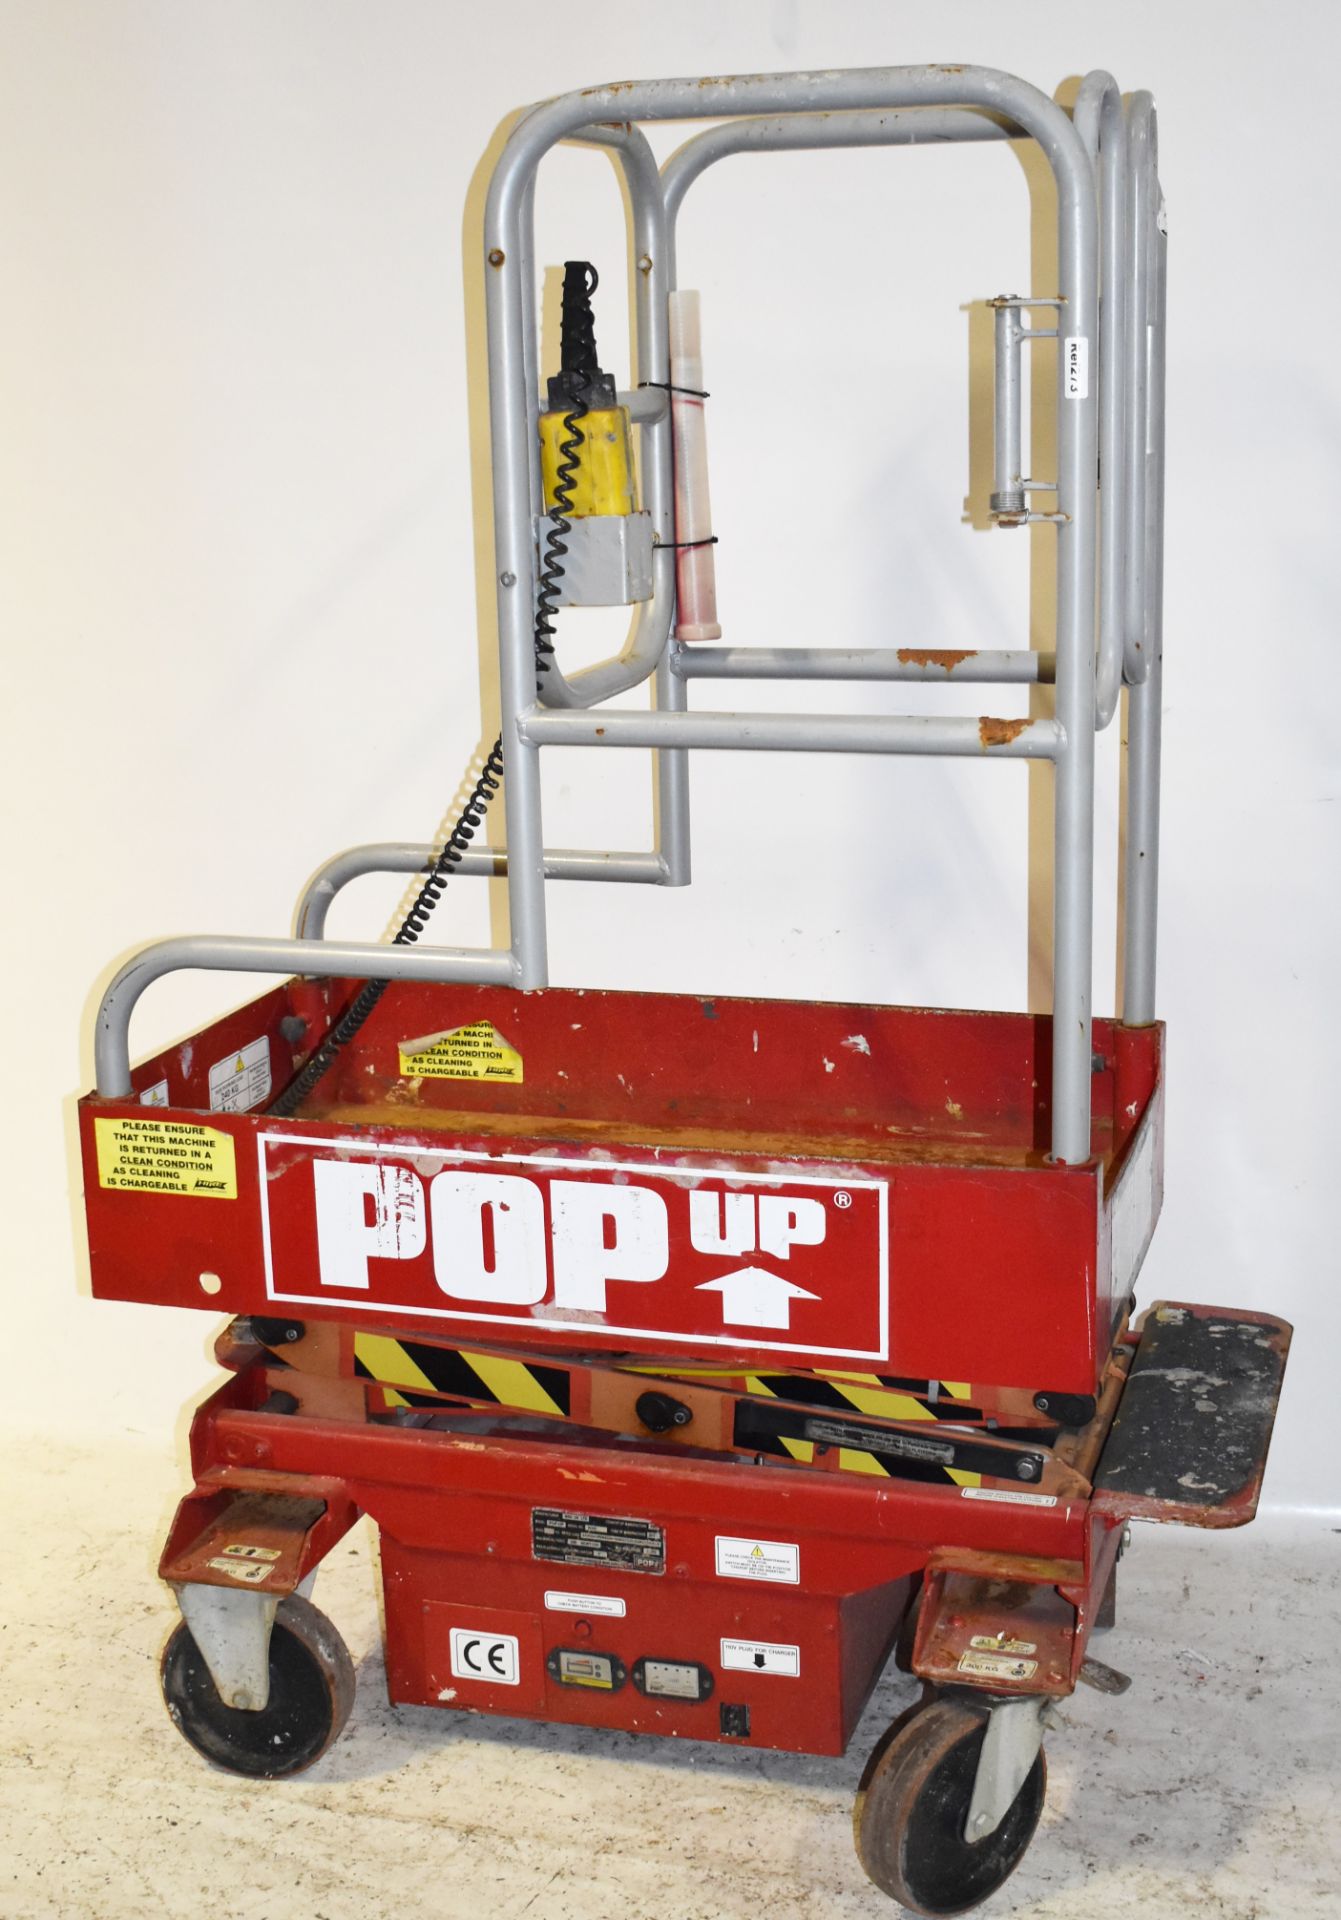 1 x Mobile Pop-Up Scissor Lift - Weight Capacity 300kg - Platform Base Max Height 161 cms - Tested - Image 3 of 9